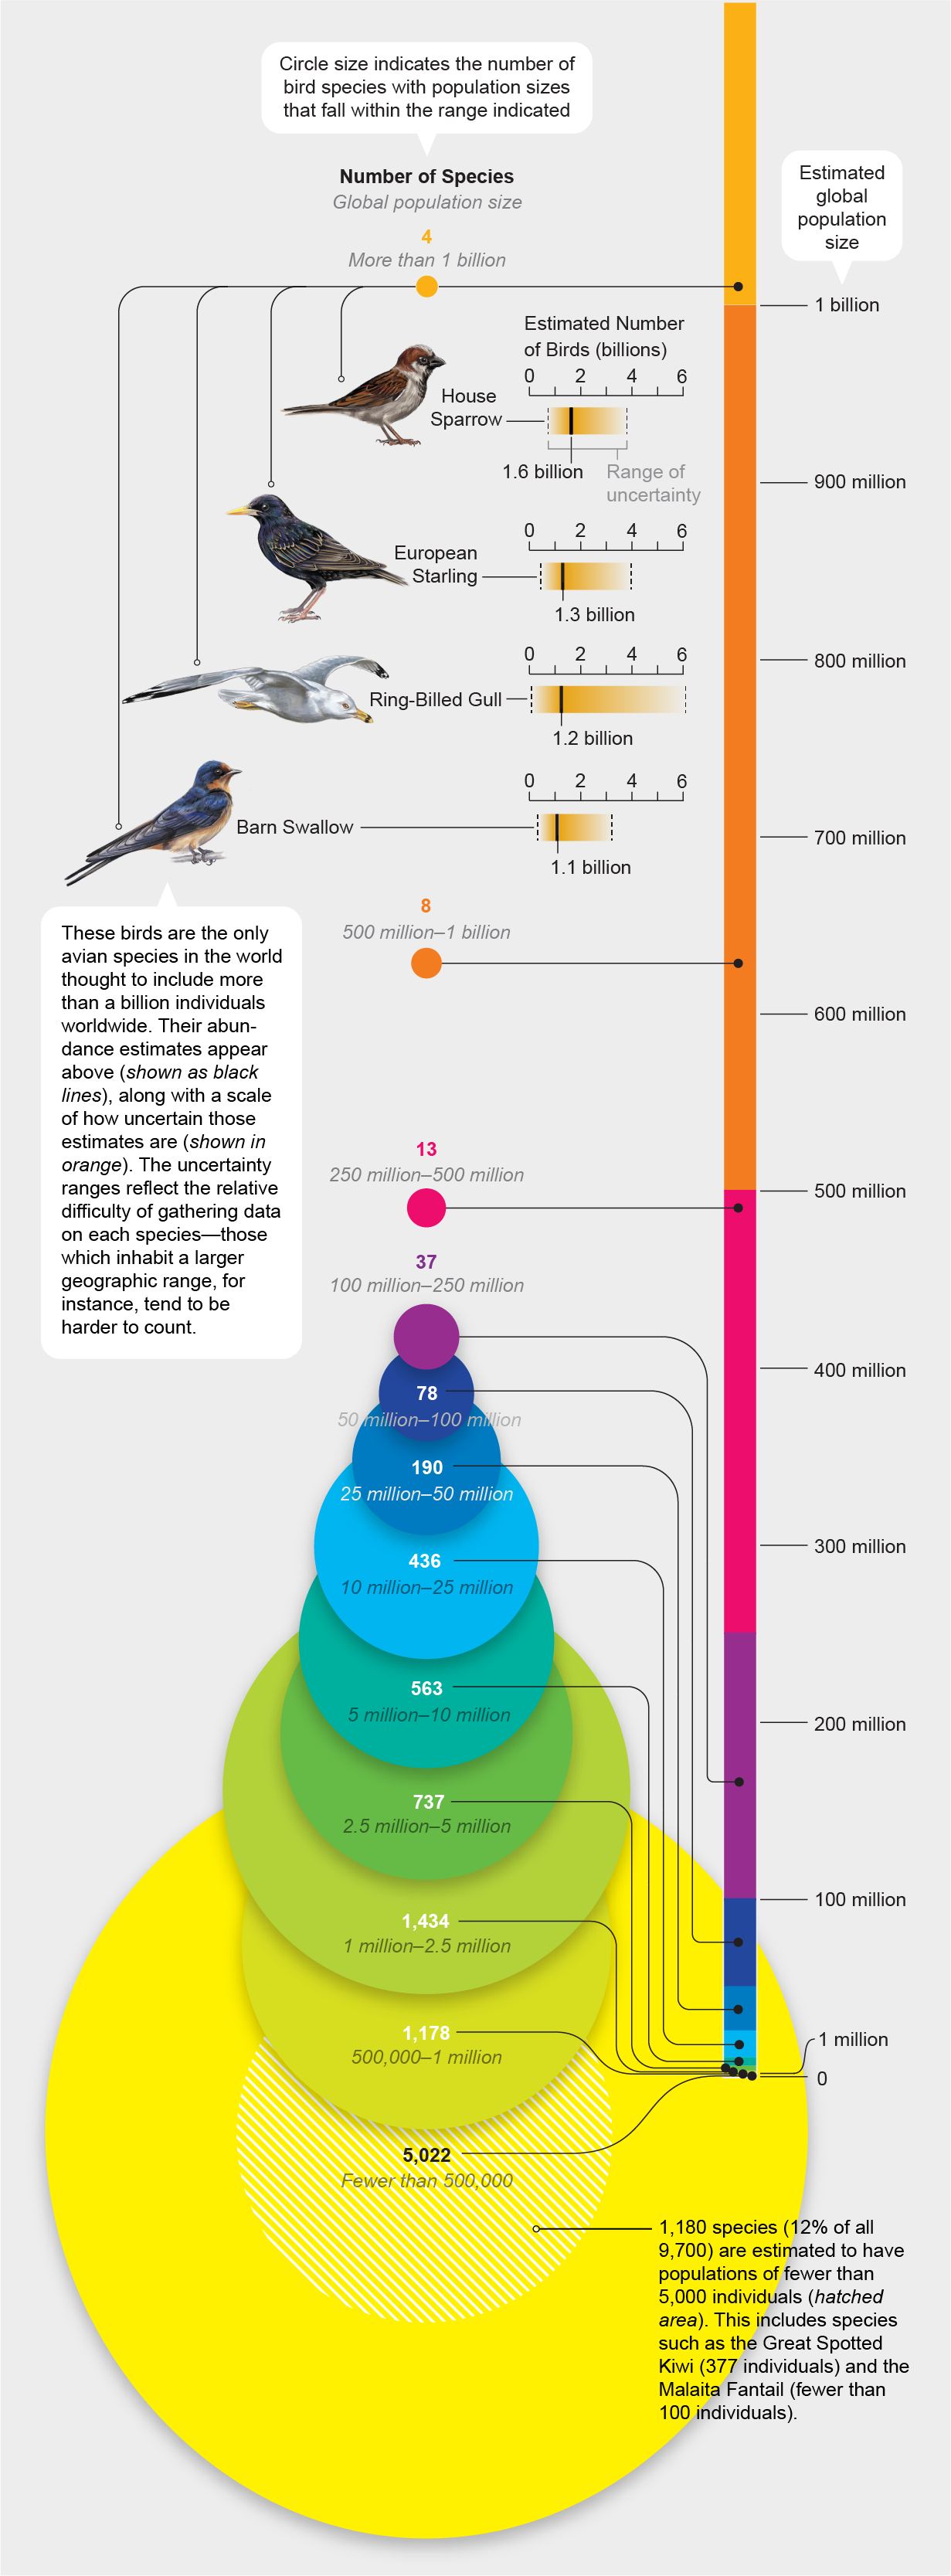 The graph groups bird species by population size and shows circles to scale according to the number of species in each group.